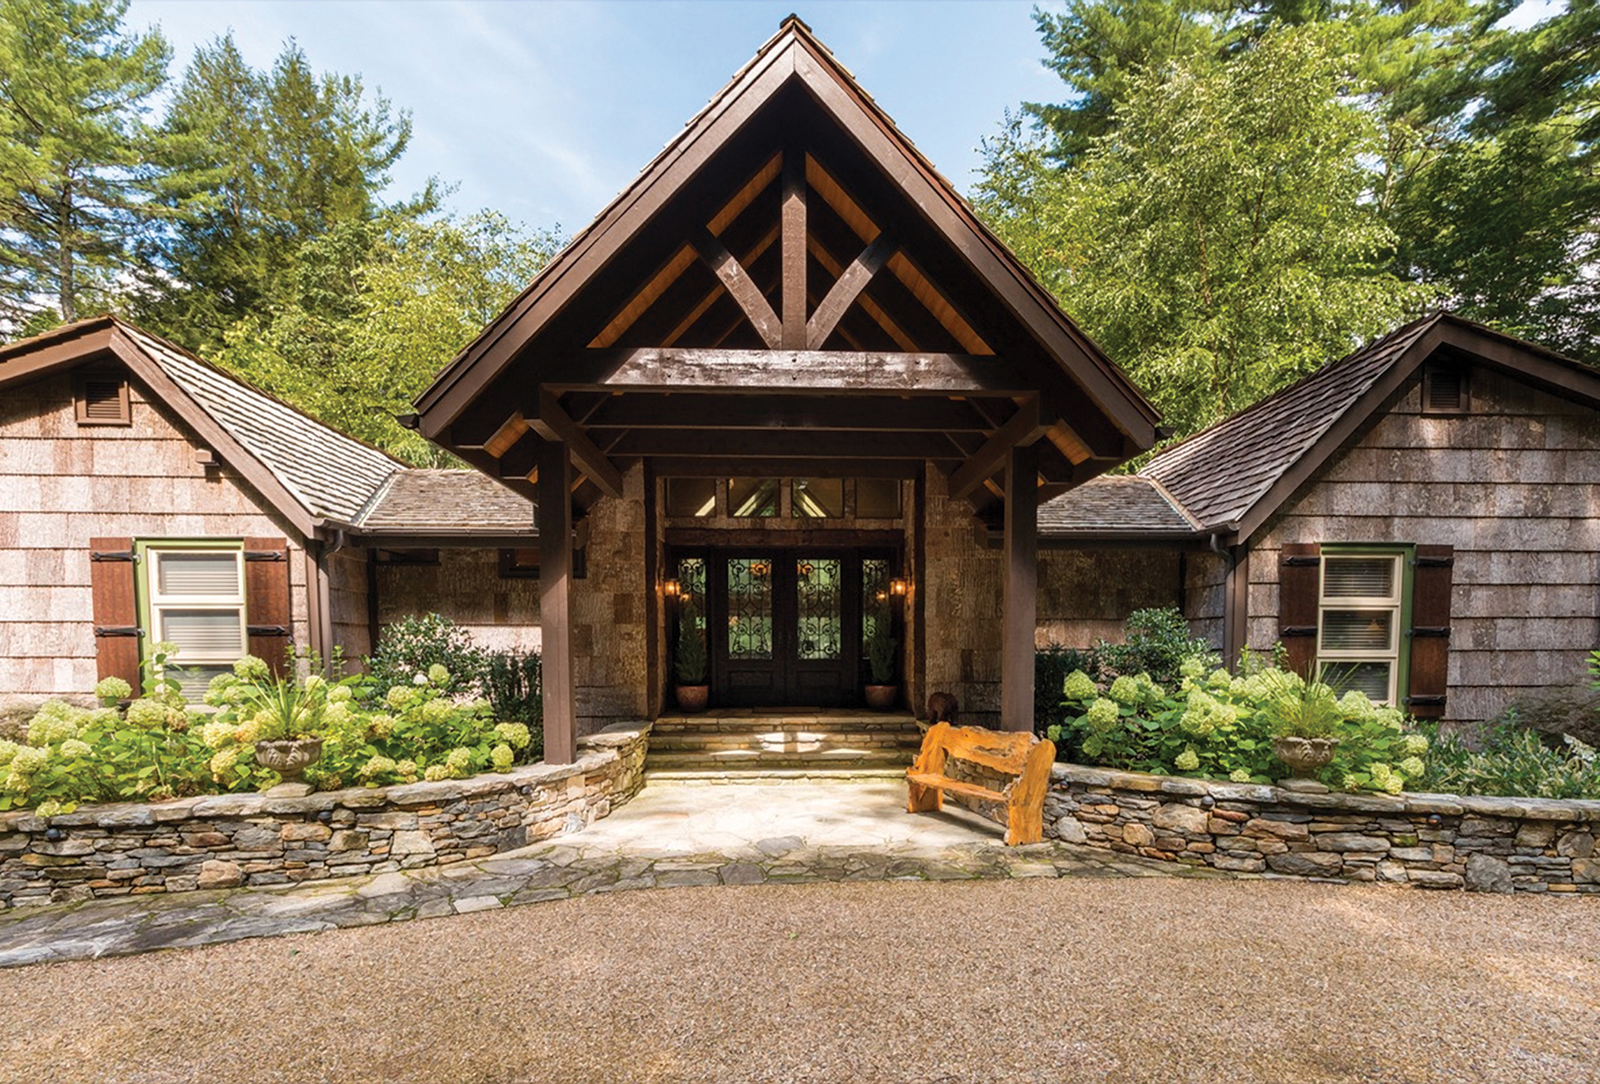 Home for Sale in Sapphire Valley, NC - entrance